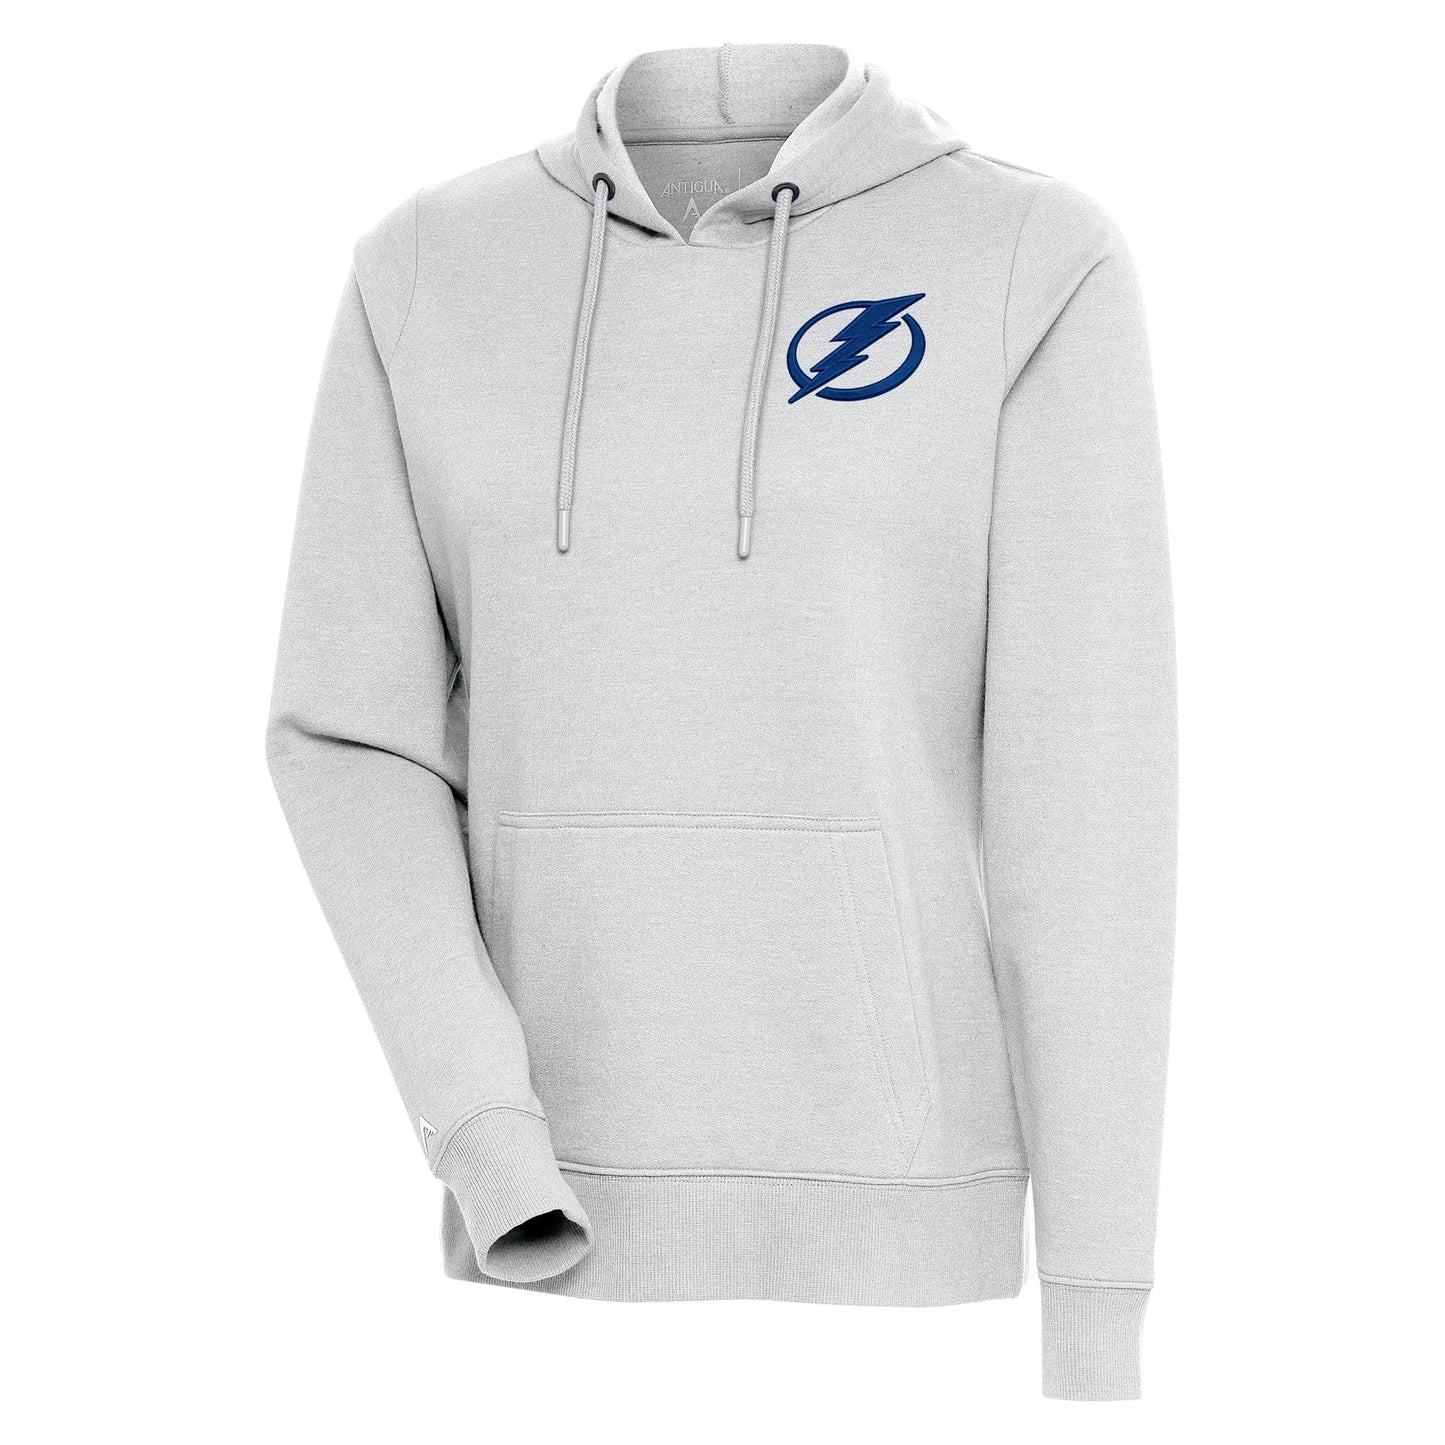 Women's Antigua Heather Gray Tampa Bay Lightning Action Chenille Pullover Hoodie